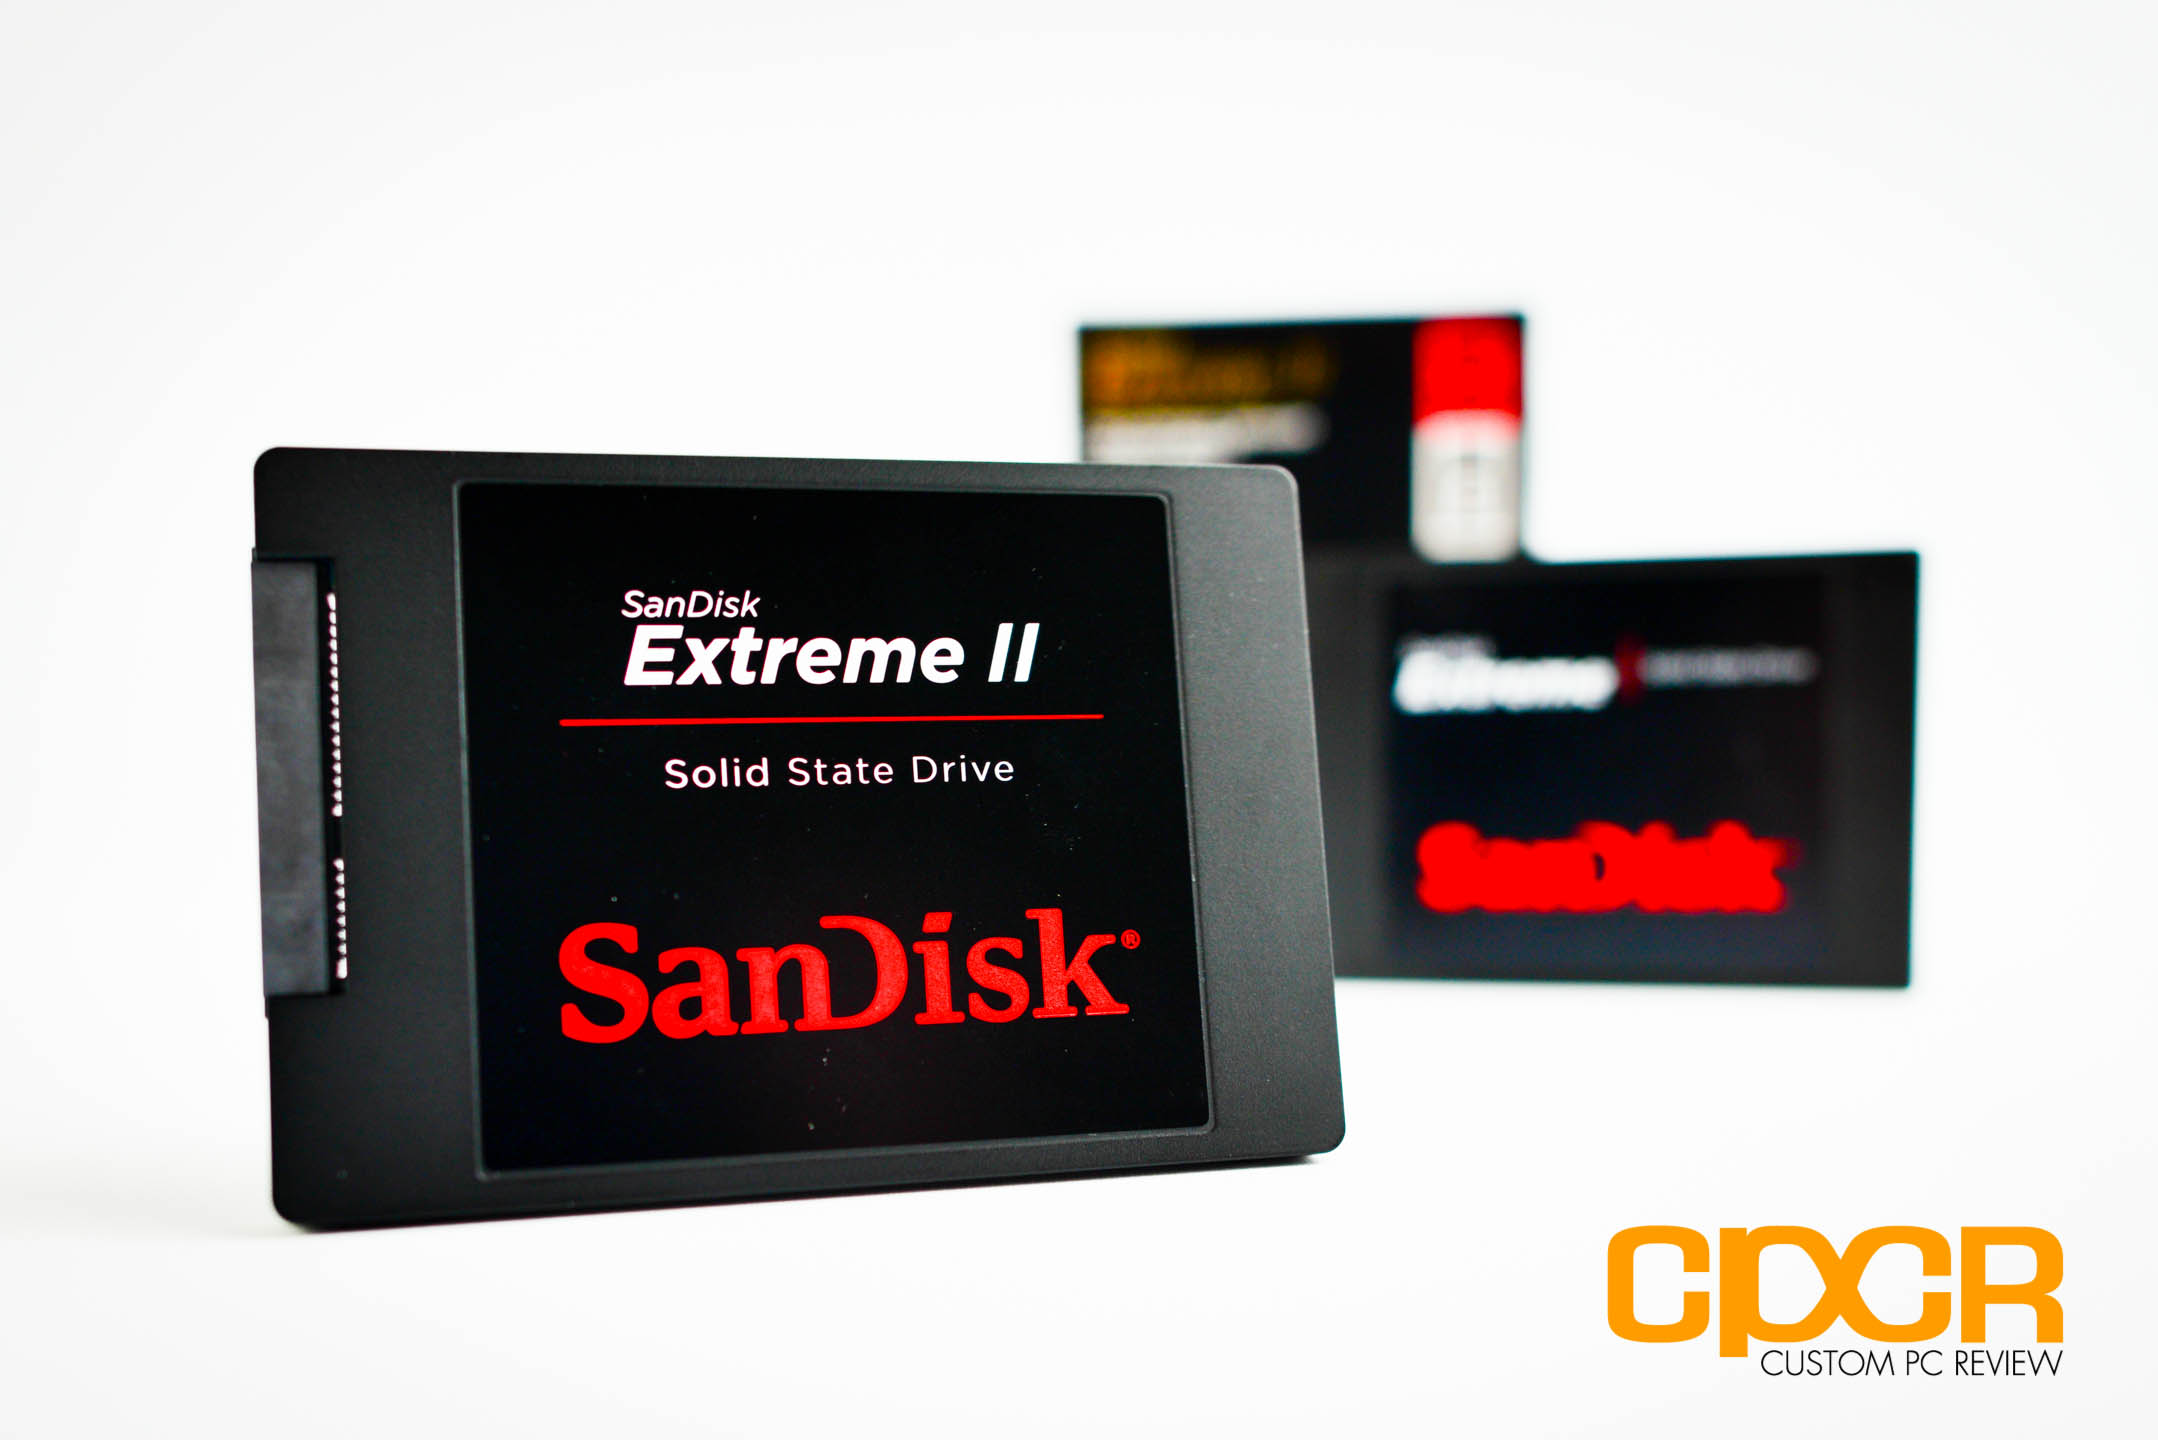 Review: SanDisk Extreme II 240GB SSD